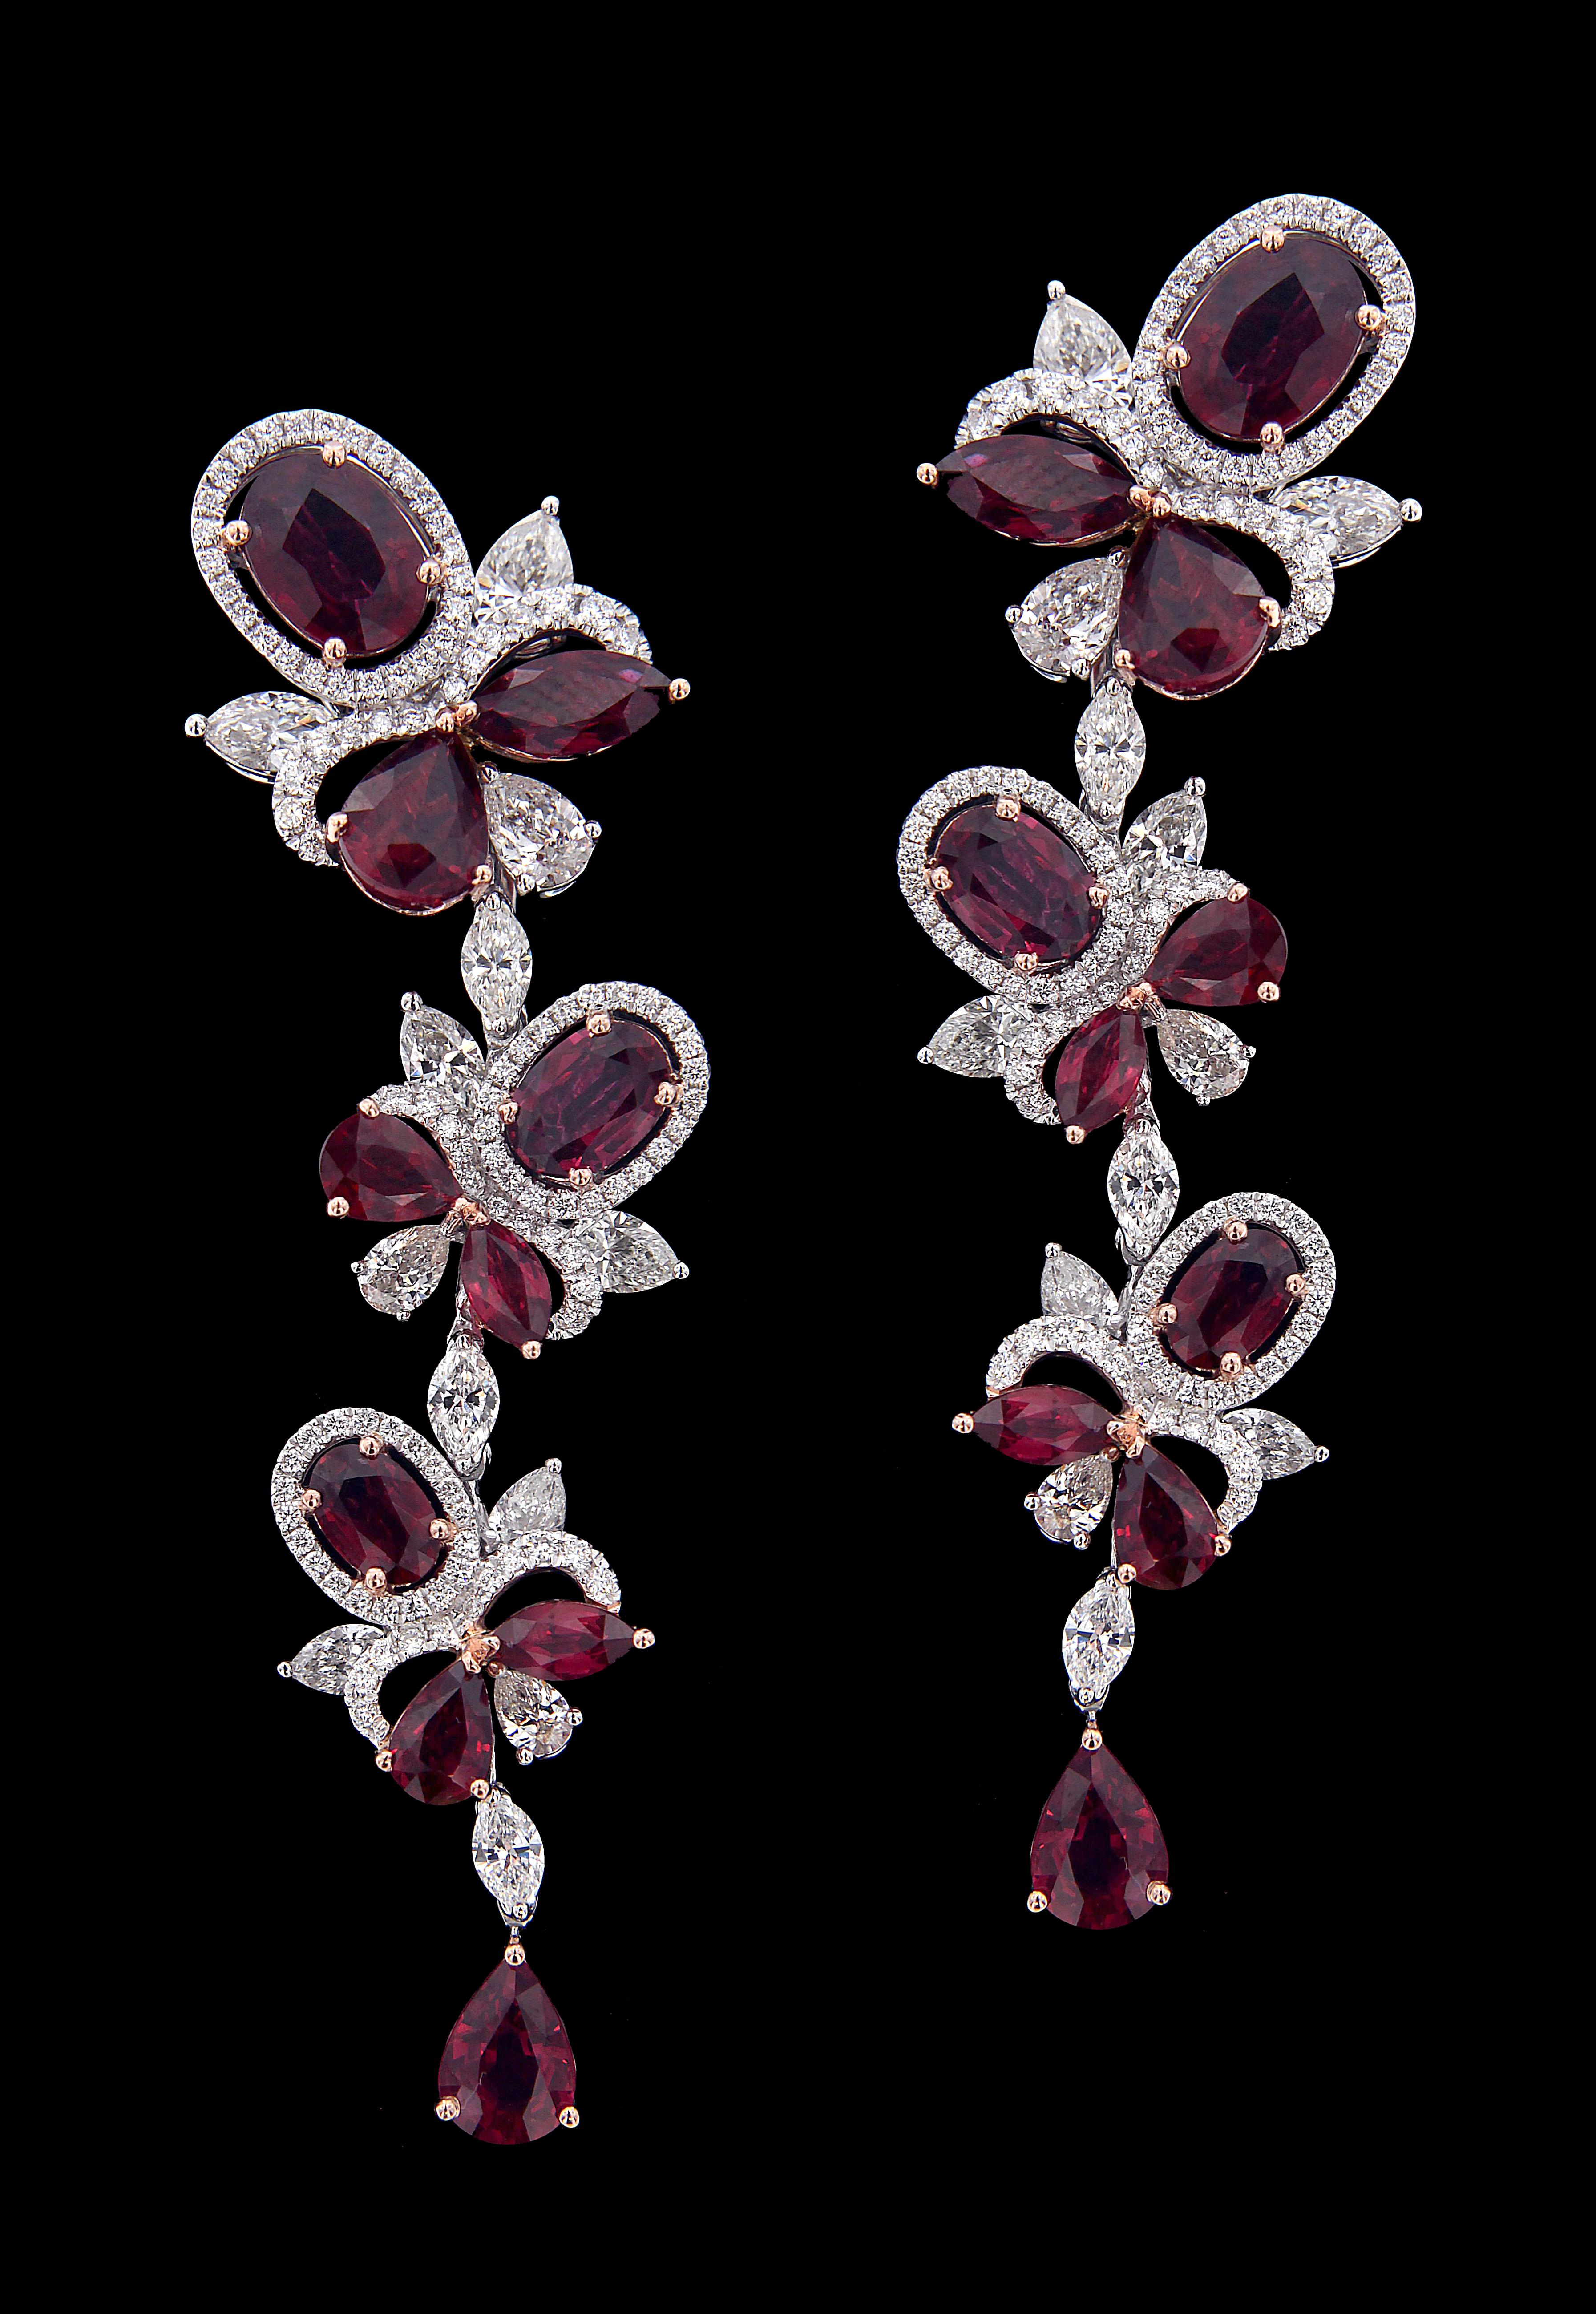 Pear Cut Exquisite 18 Karat White Gold, Diamonds and Ruby Earrings For Sale